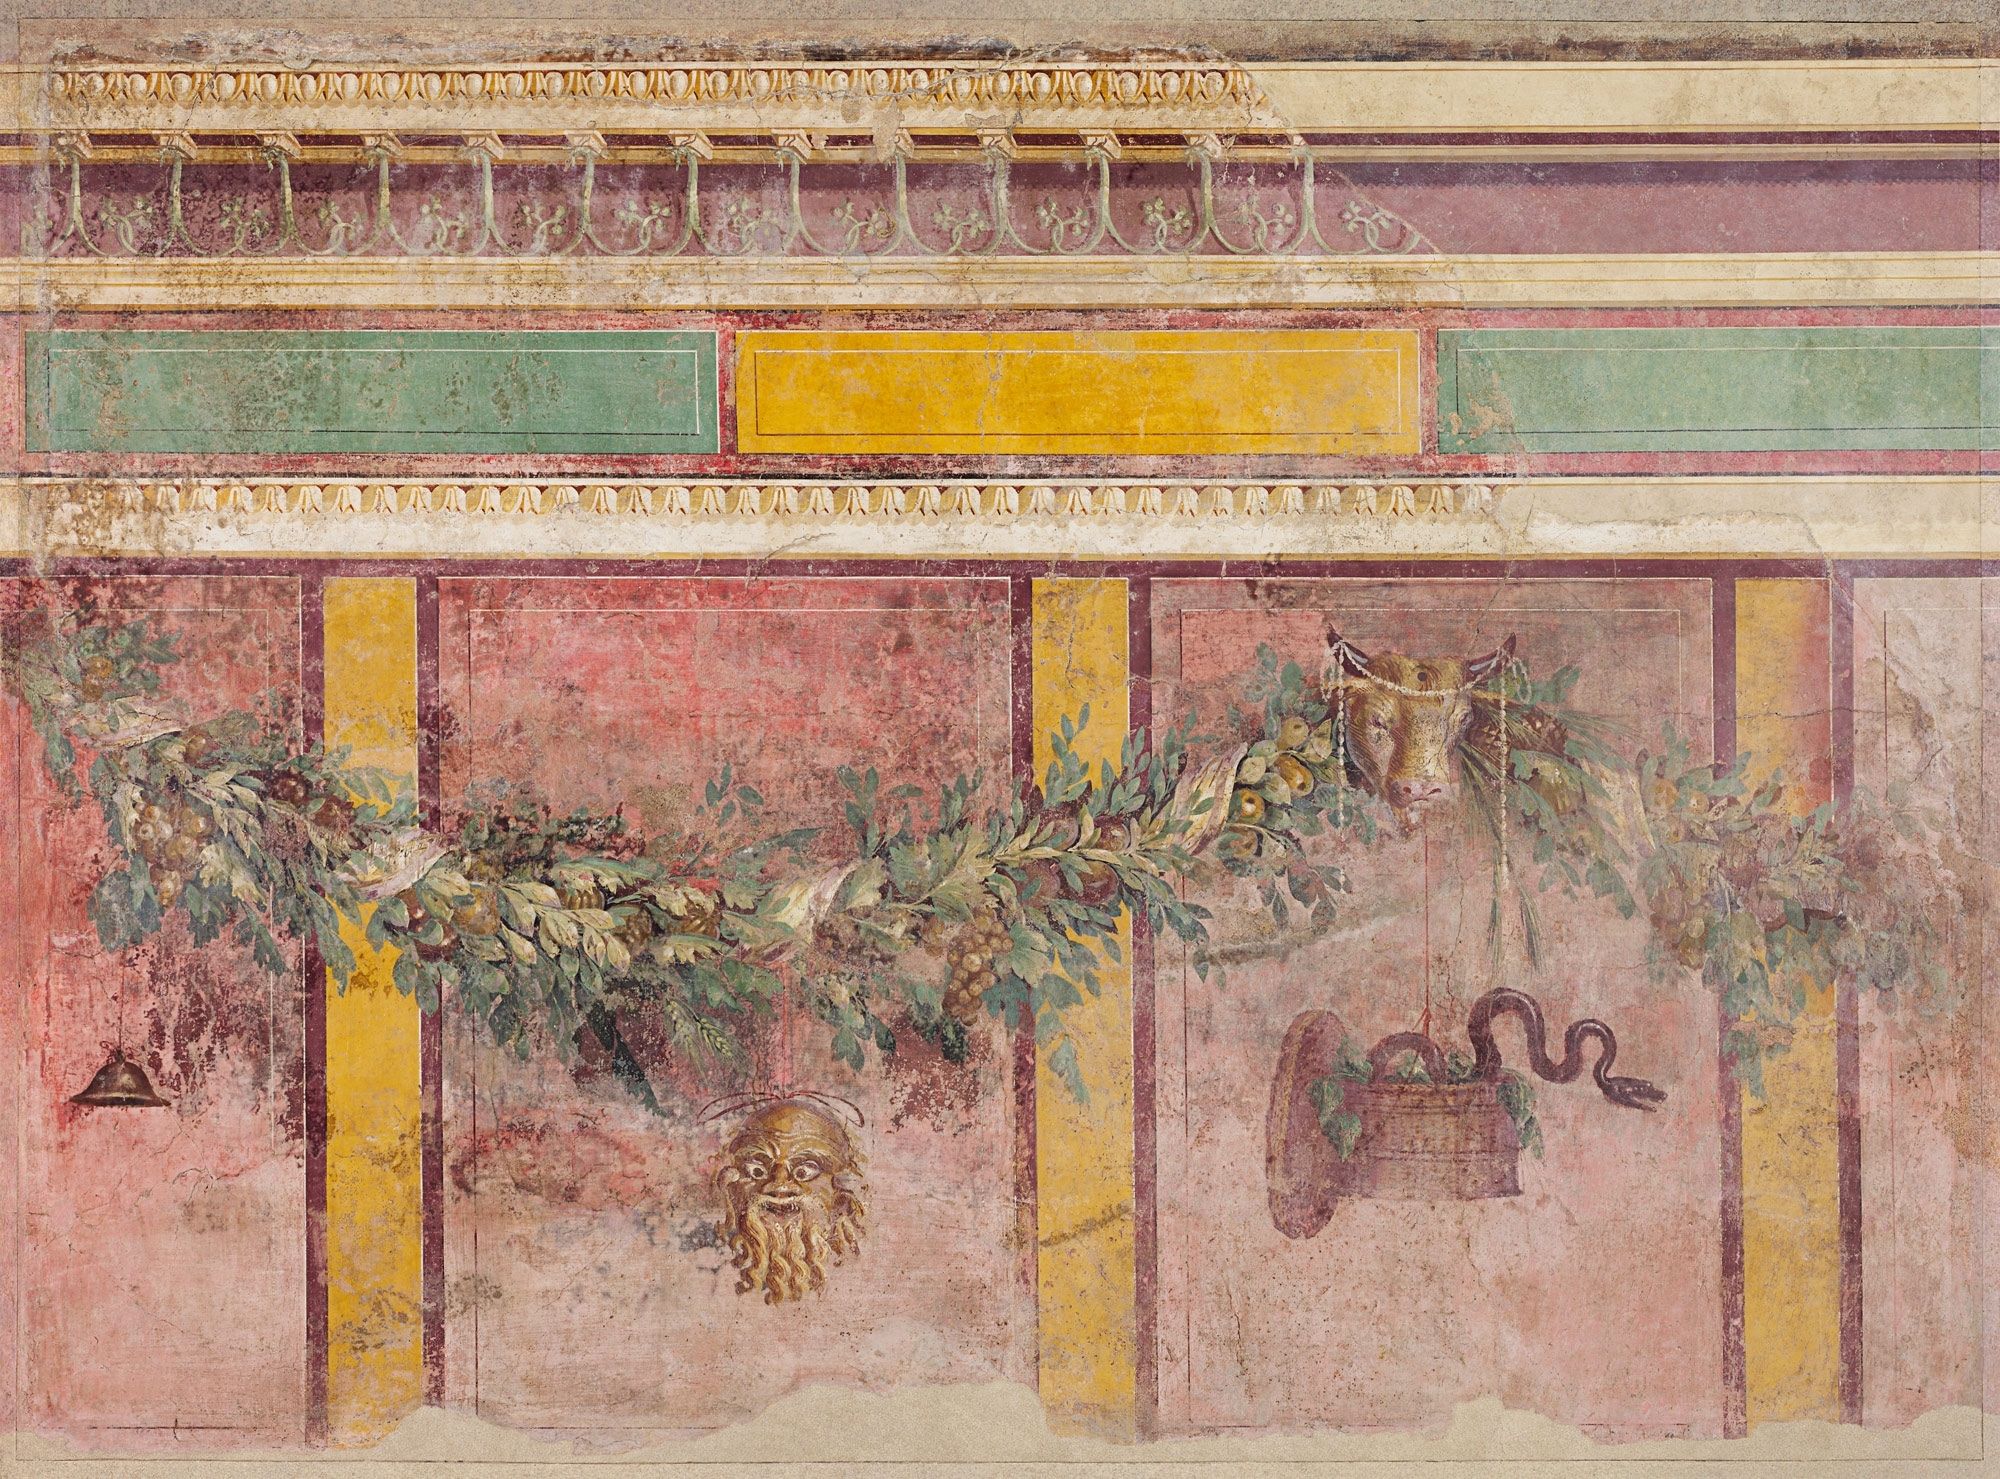 Preferred Ancient Greek Wall Art With Wall Painting From The West Wall Of Room L Of The Villa Of P (View 7 of 15)